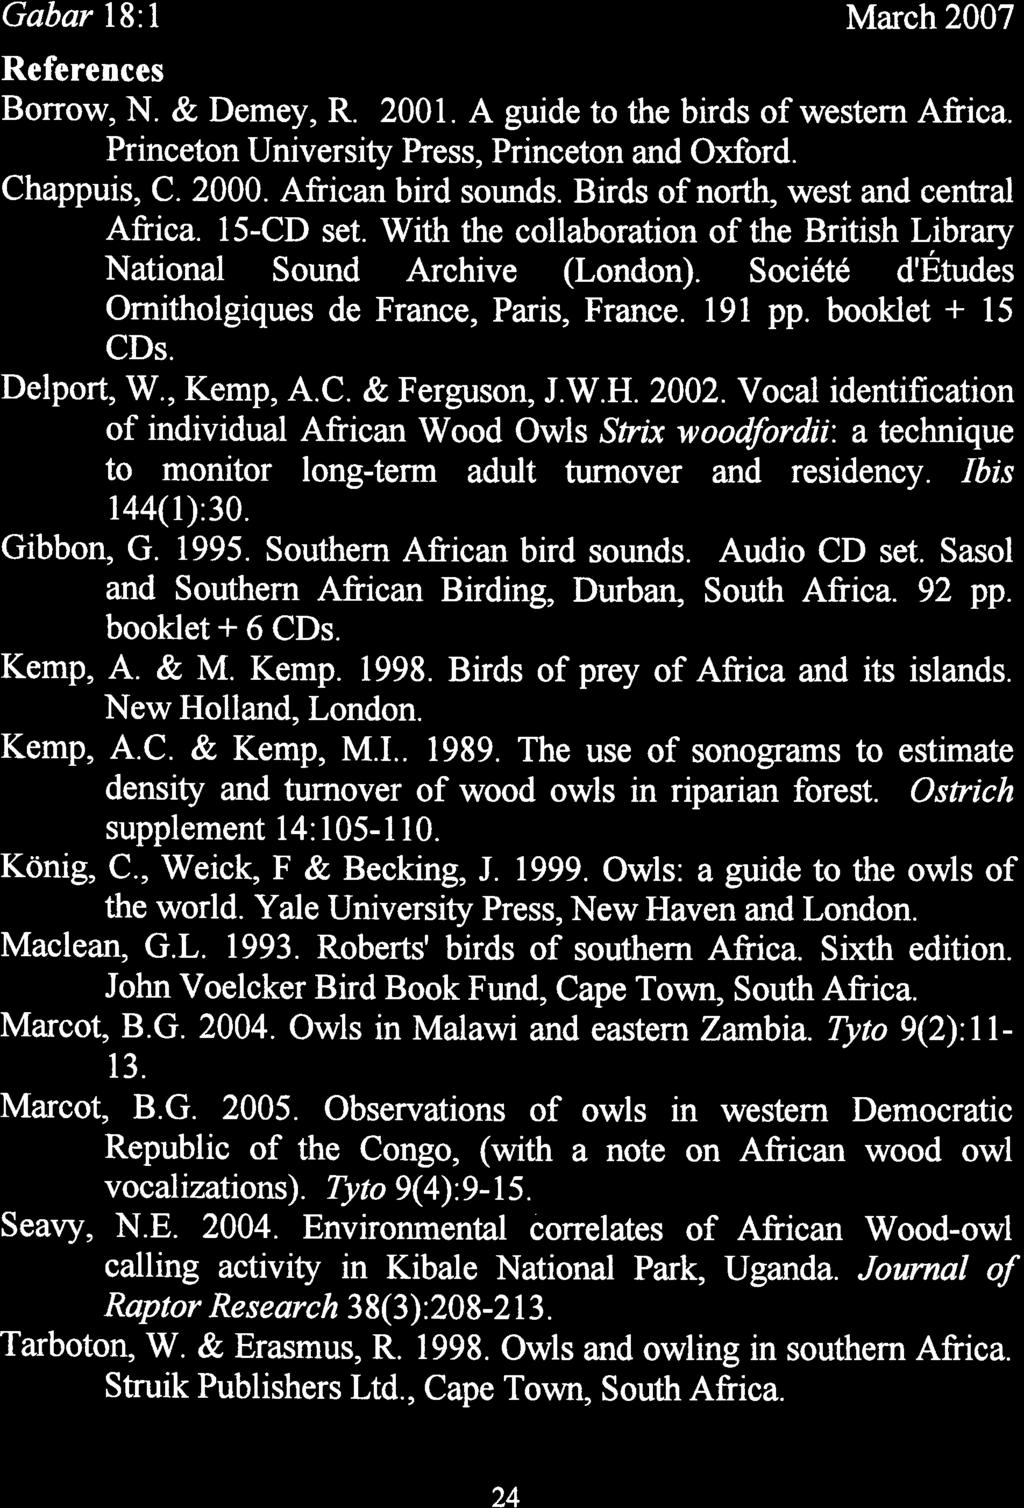 References Borrow, N. & Demey, R. 21. A guide to the birds of western Afiica. Princeton University Press, Princeton and Oxford. Chappuis, C. 2. African bird sounds.